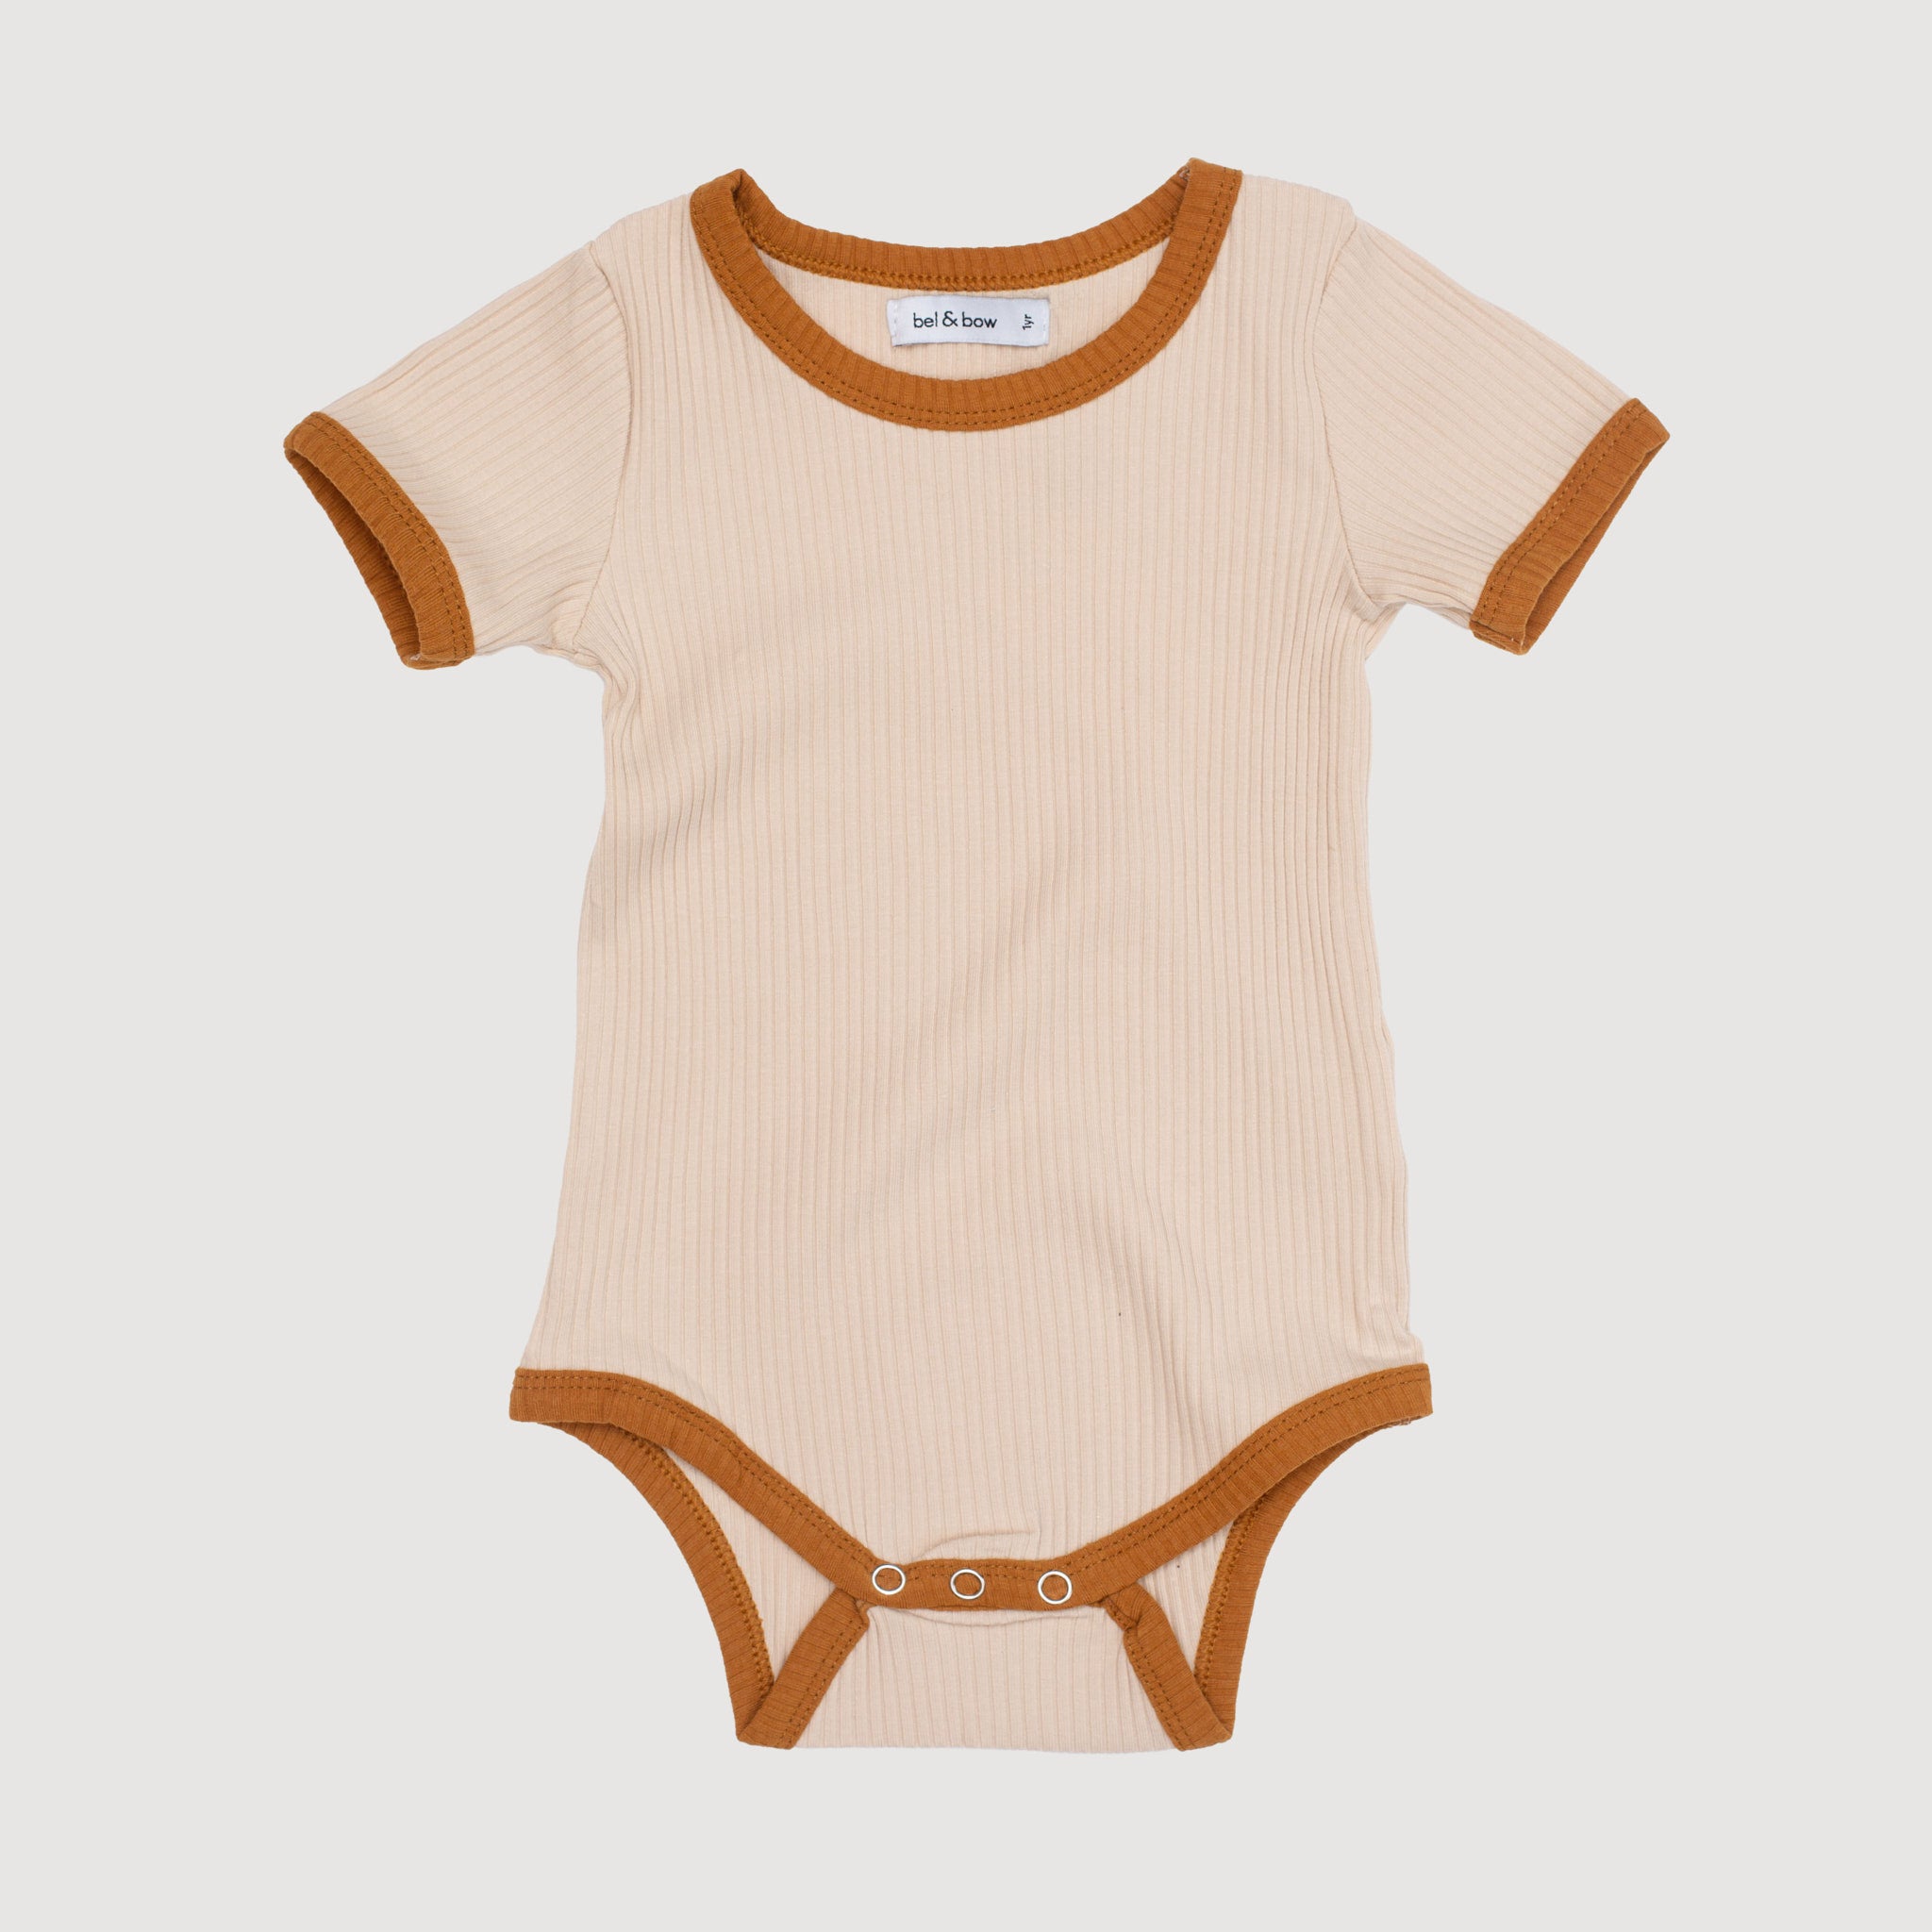 Retro Ringer Ribbed Bodysuit - Oatmeal with Mustard Binds bel & bow